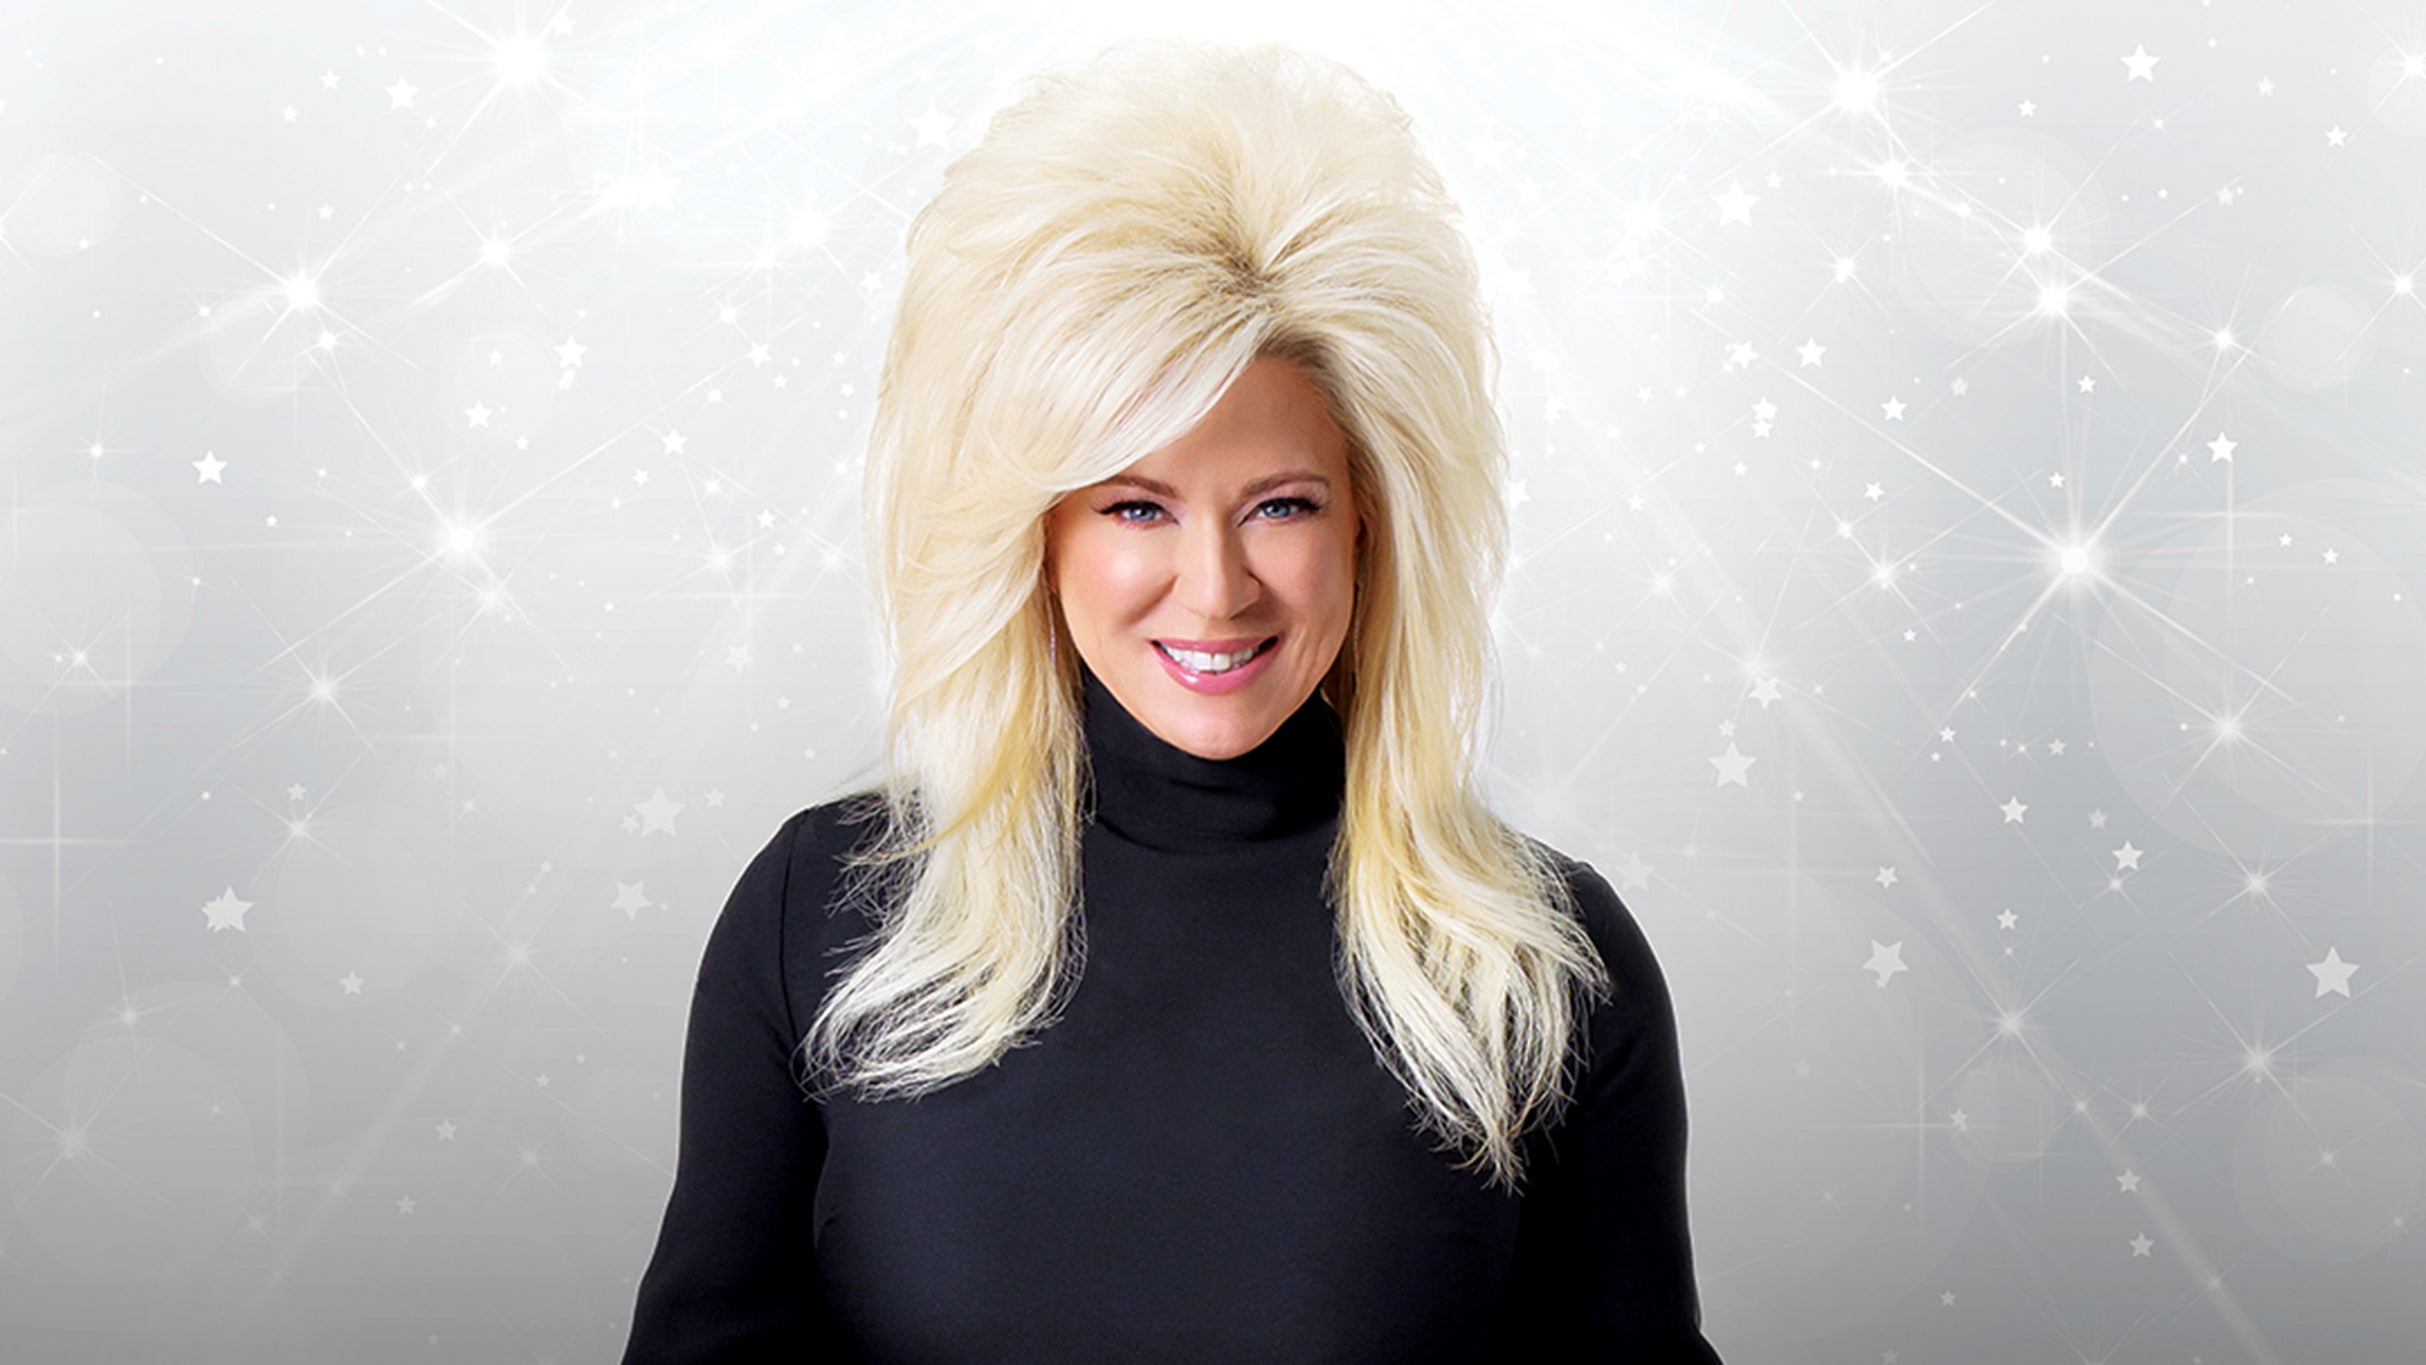 Theresa Caputo Live! The Experience in Bethlehem promo photo for Official Platinum presale offer code